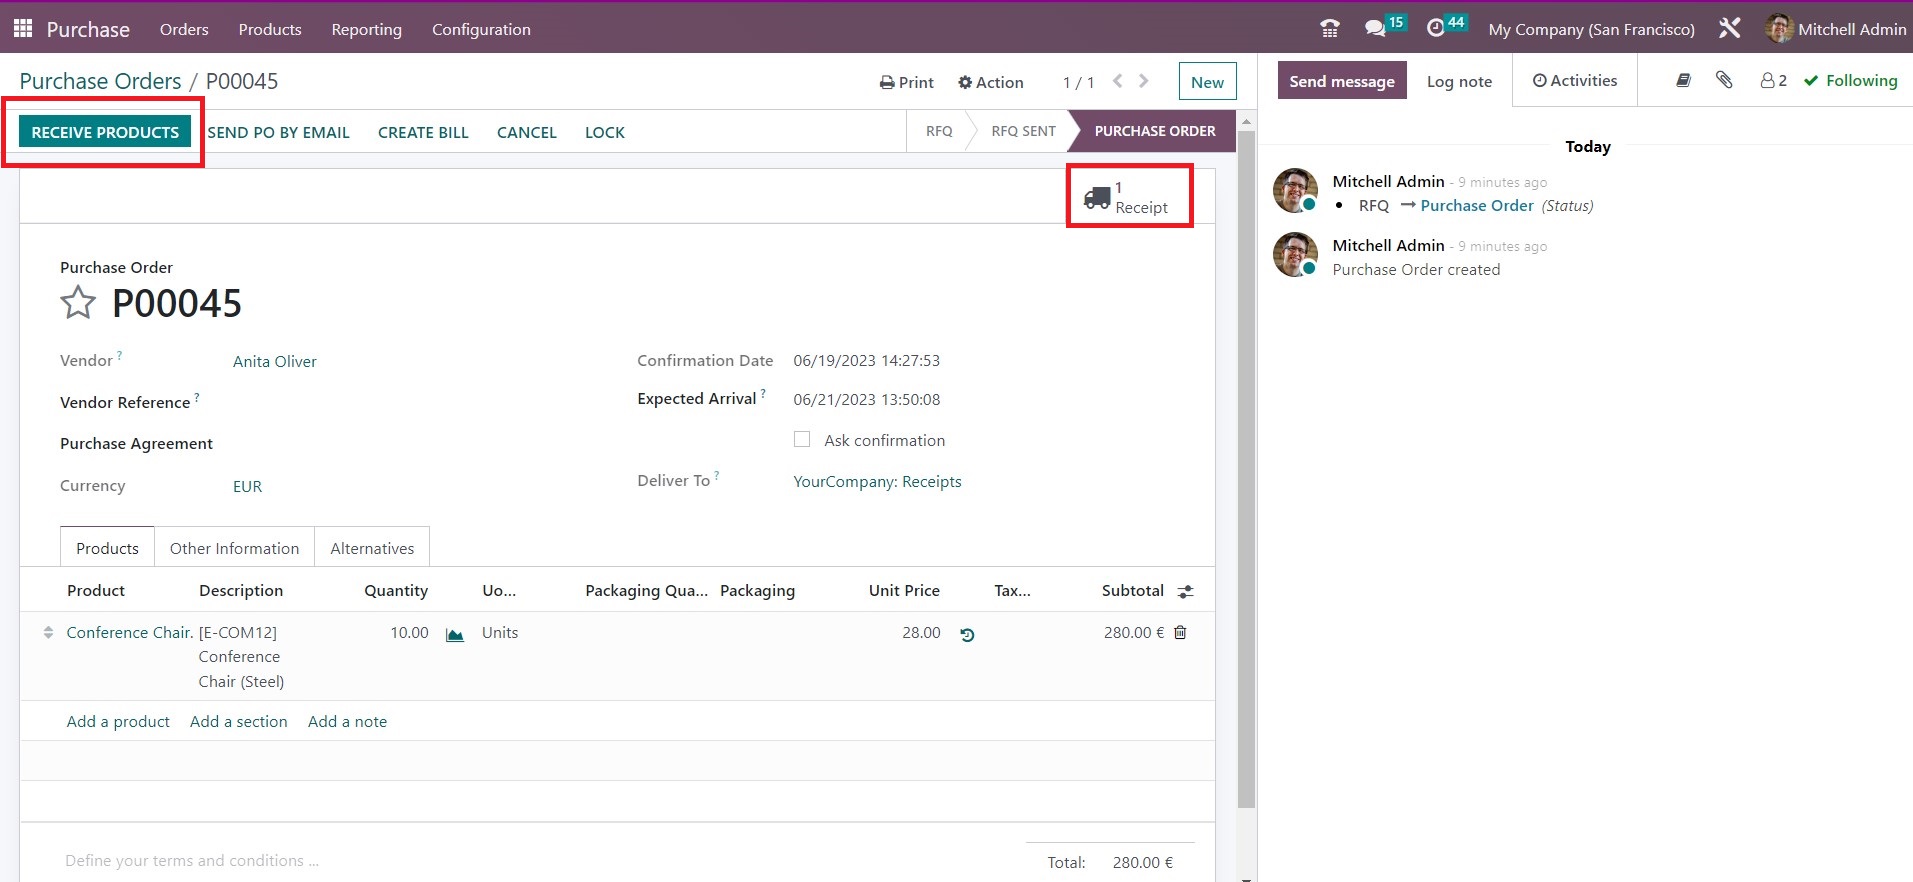 Confirming Deliveries and Receipts in Odoo - Midis - 15